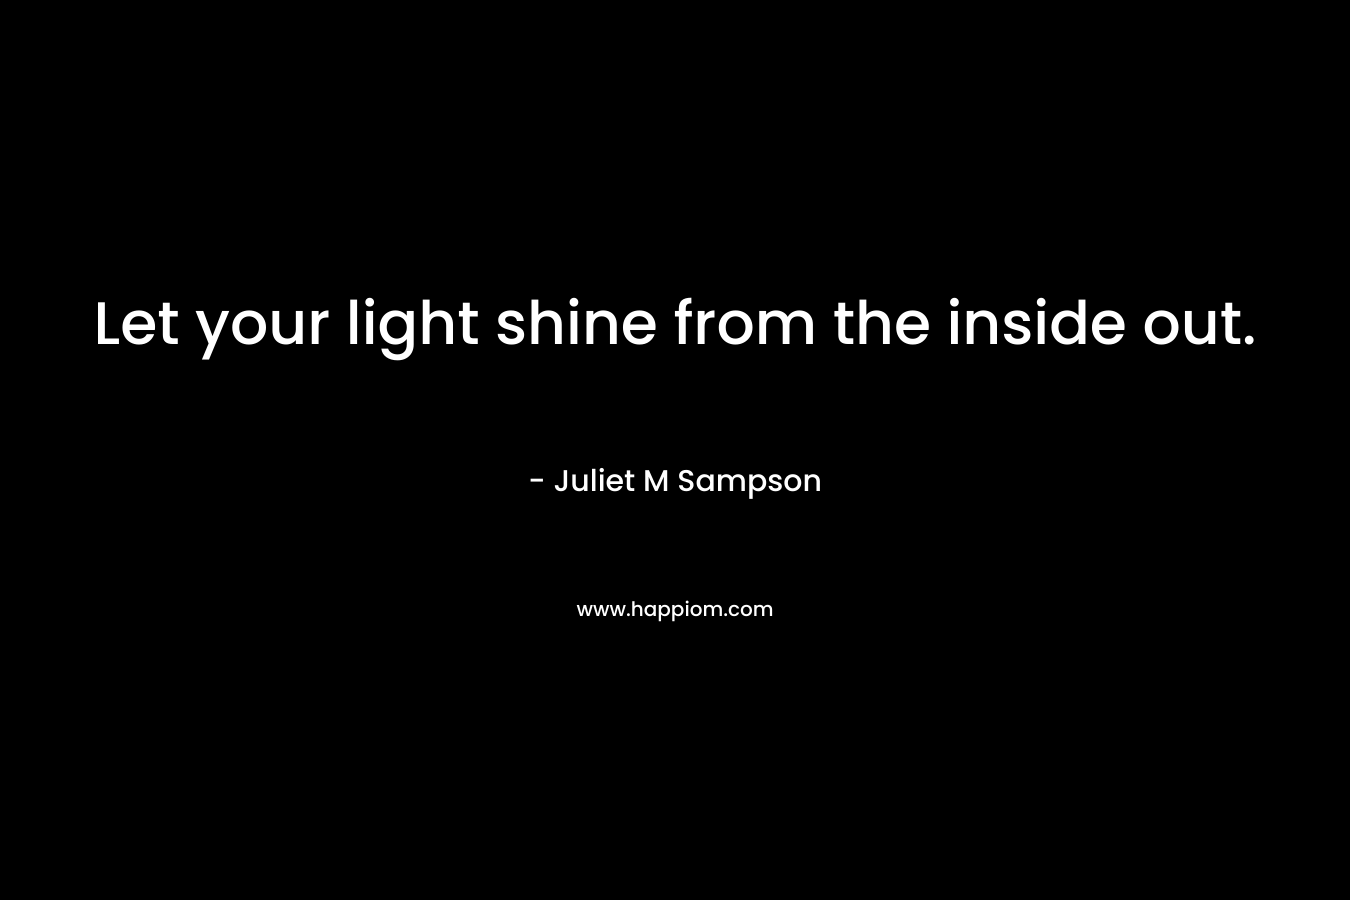 Let your light shine from the inside out. – Juliet M Sampson